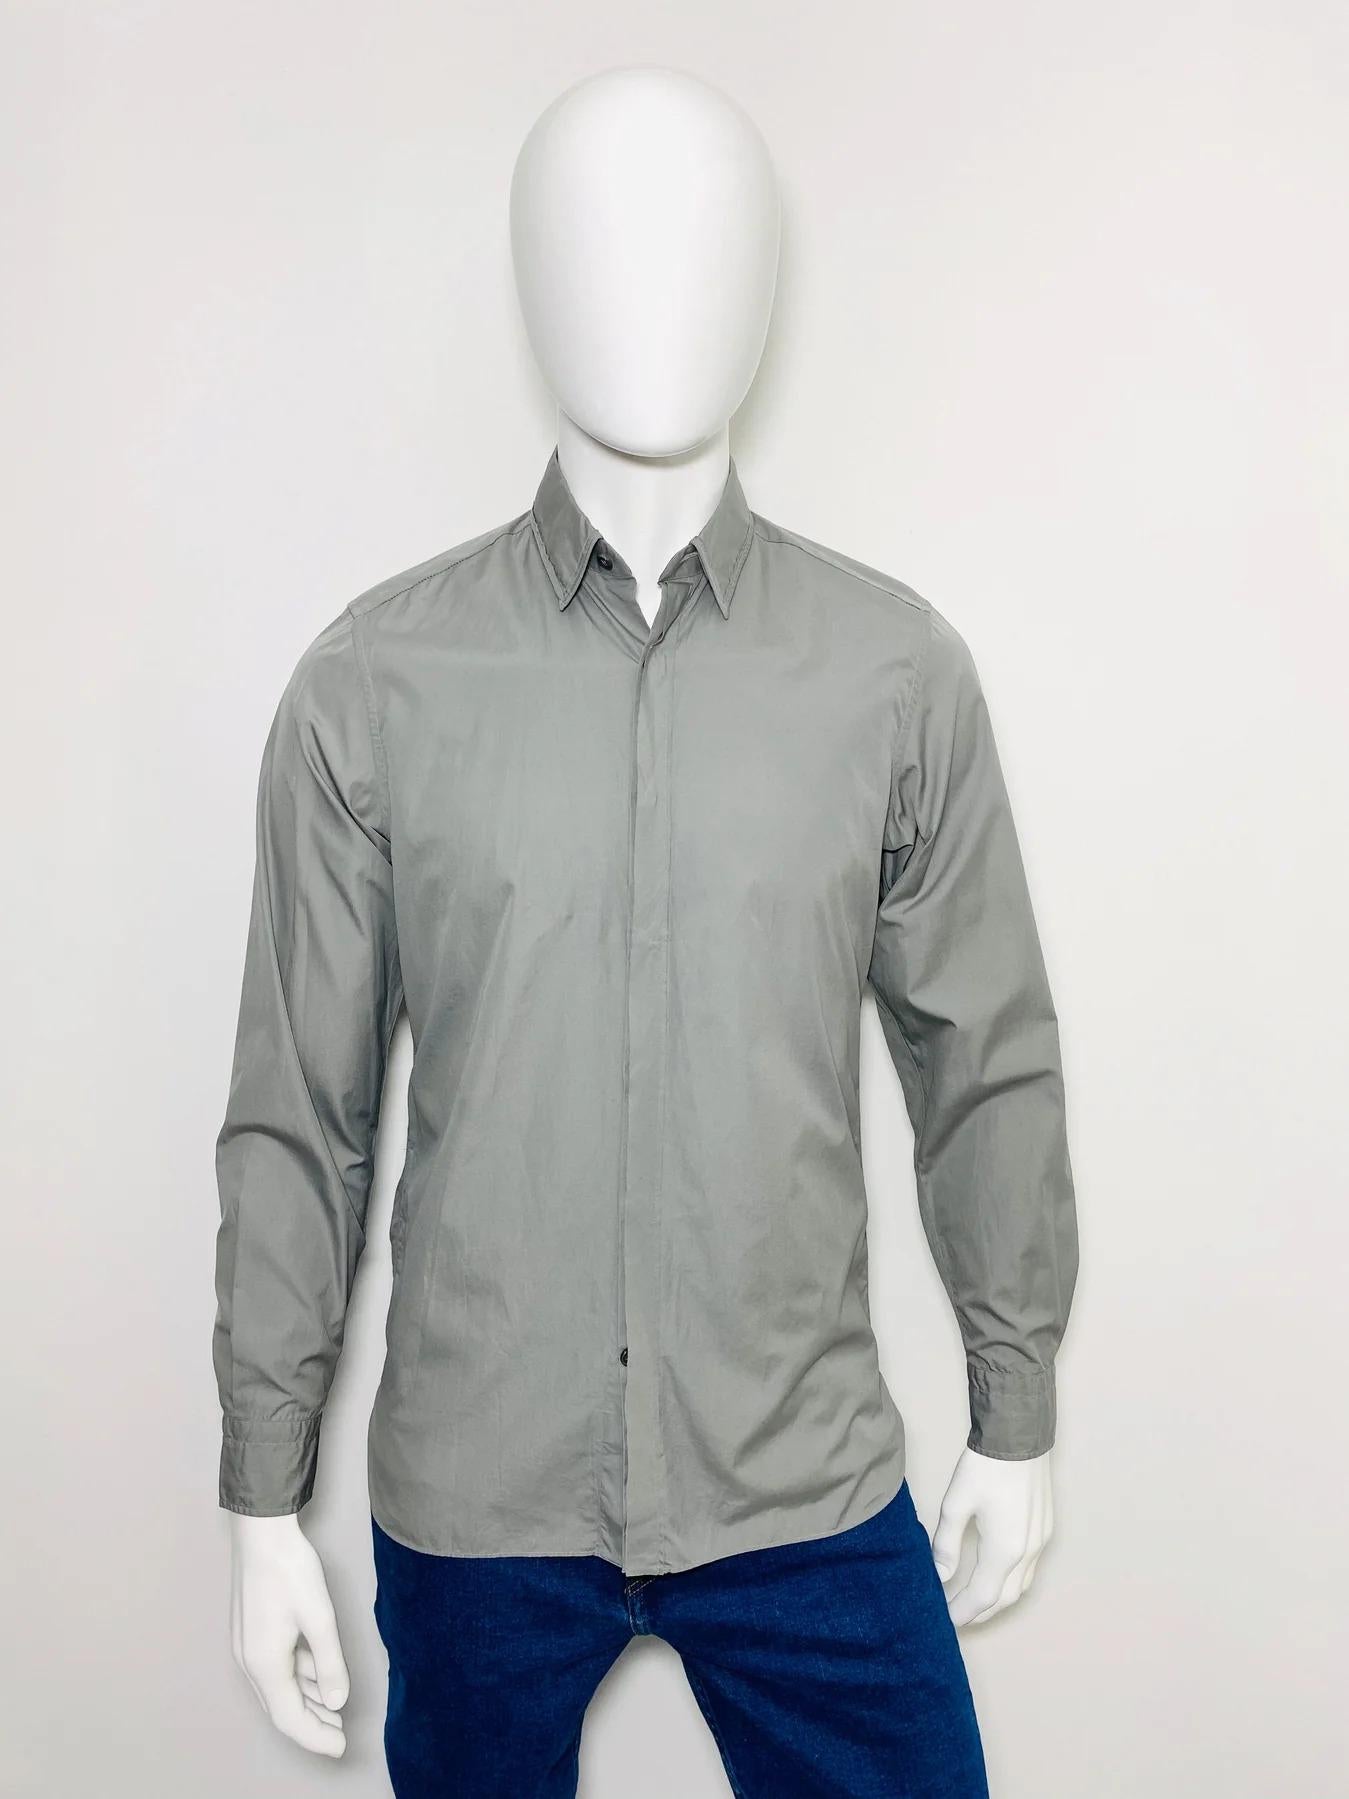 Lanvin Grey Cotton Shirt

Concealed buttons fastening to the front. Long sleeves.

Additional information:
Size – 38
Condition – Very Good